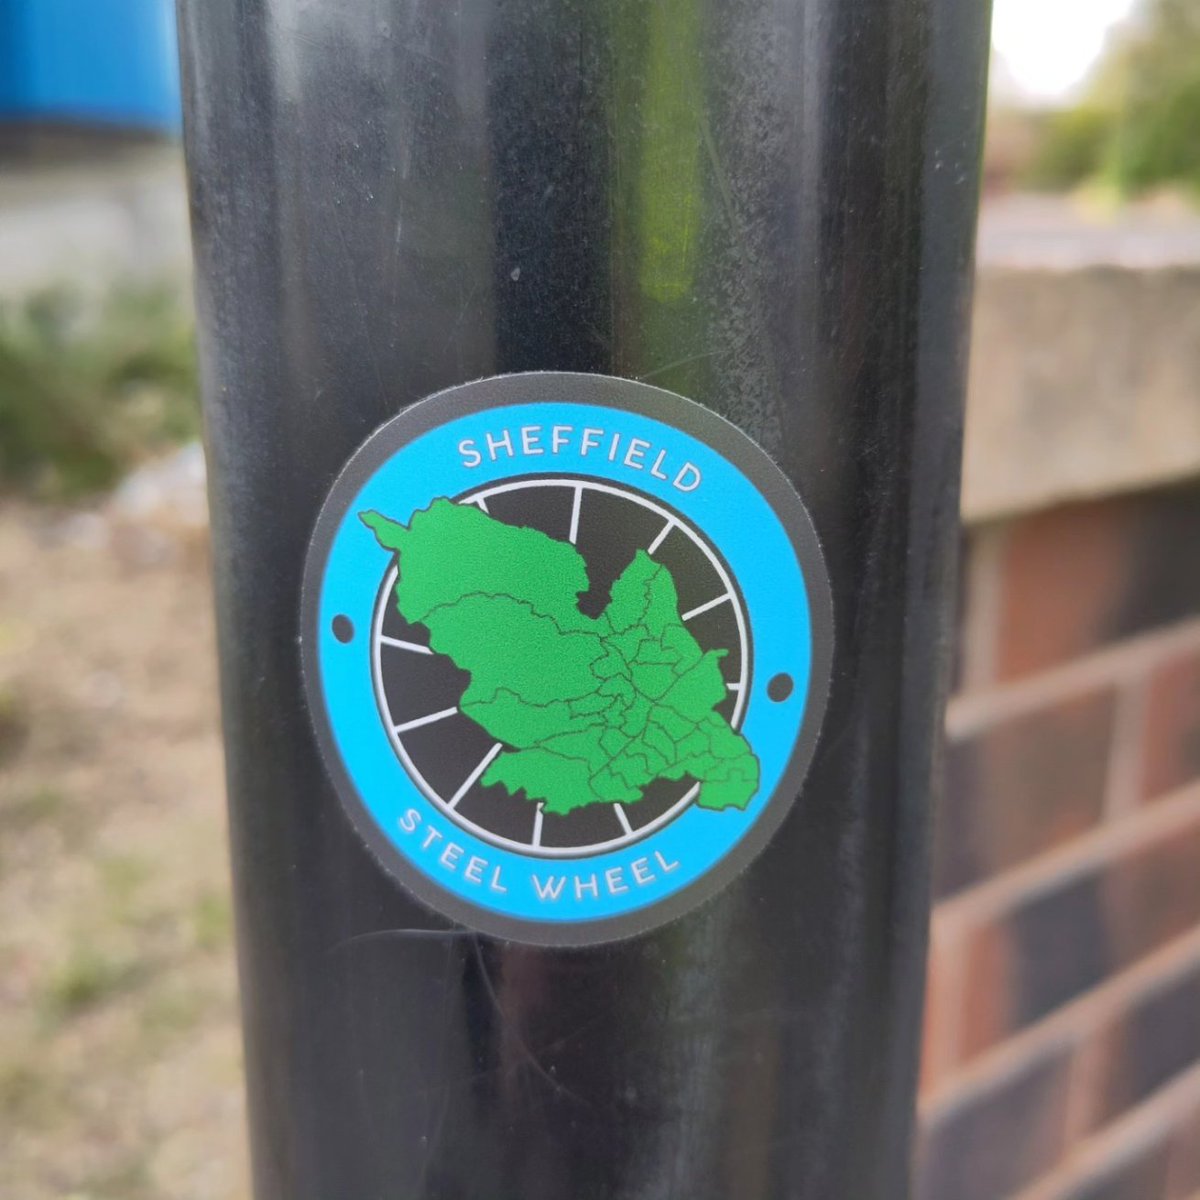 Steel Wheel waymarker stickers, can now be found along parts of the route. Have you found any yet? Full proposal can be found at sheffieldenvironmental.net/sheffsteelwheel #SheffSteelWheel